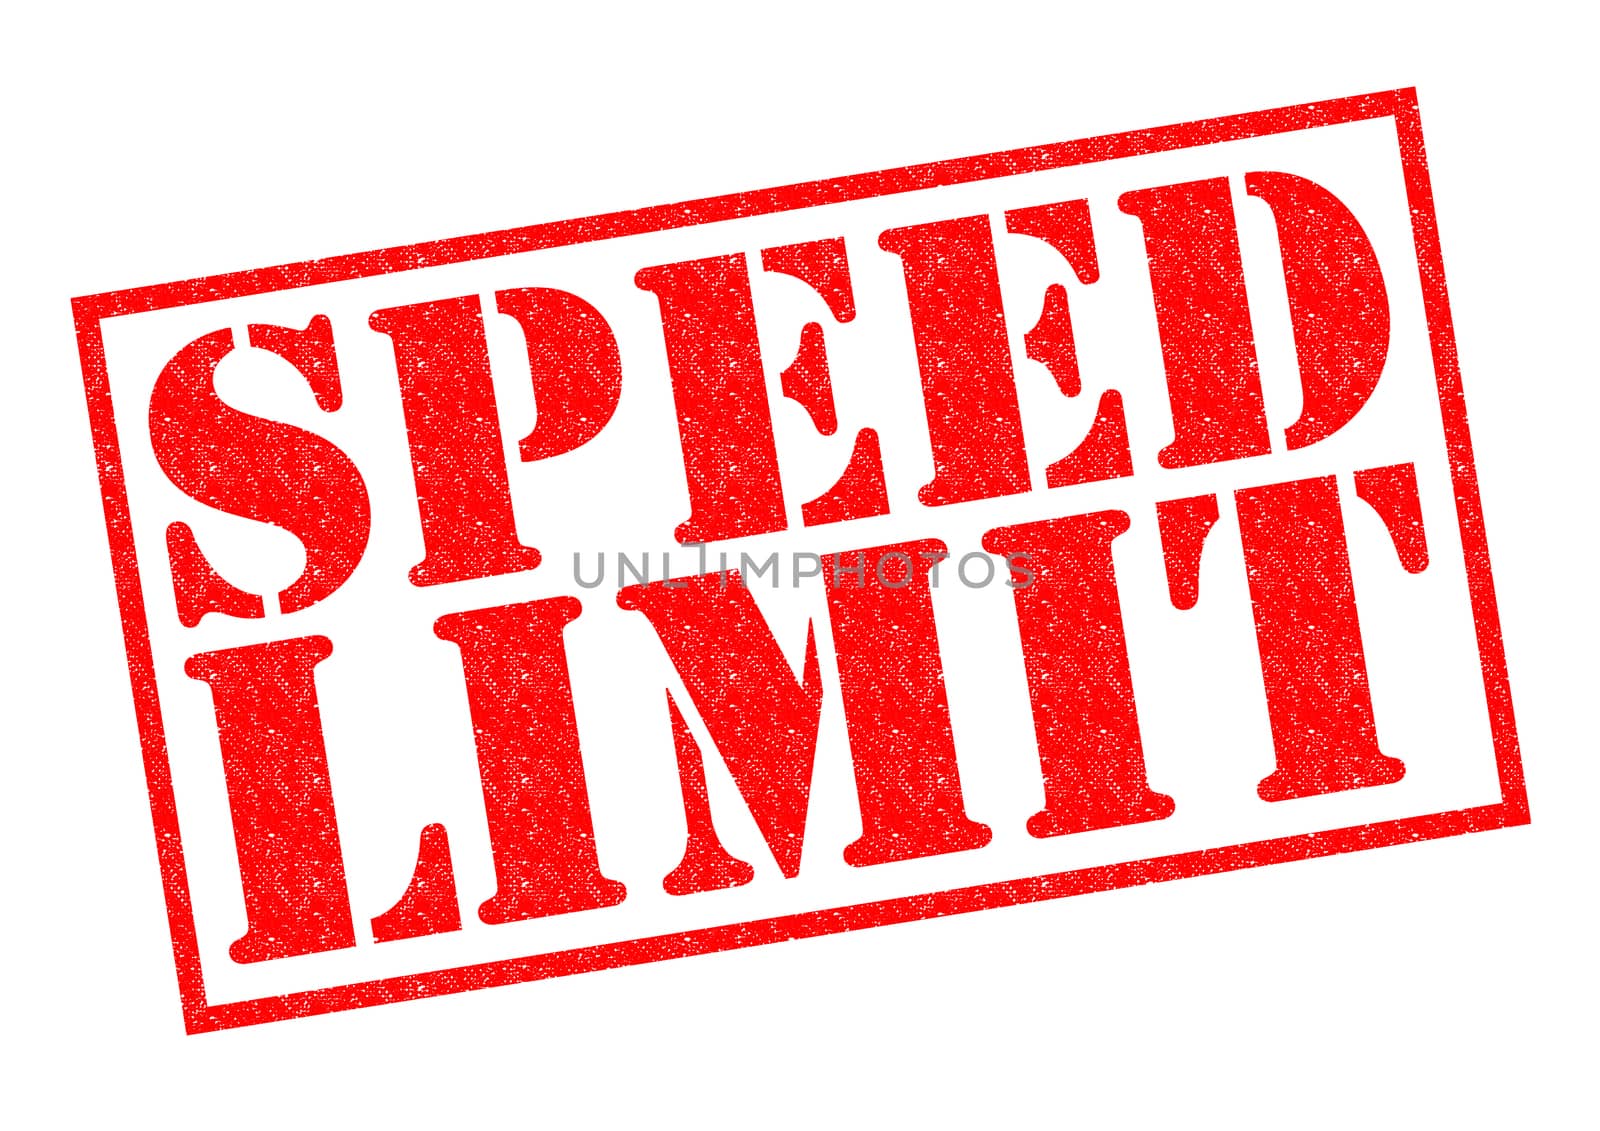 SPEED LIMIT red Rubber Stamp over a white background.